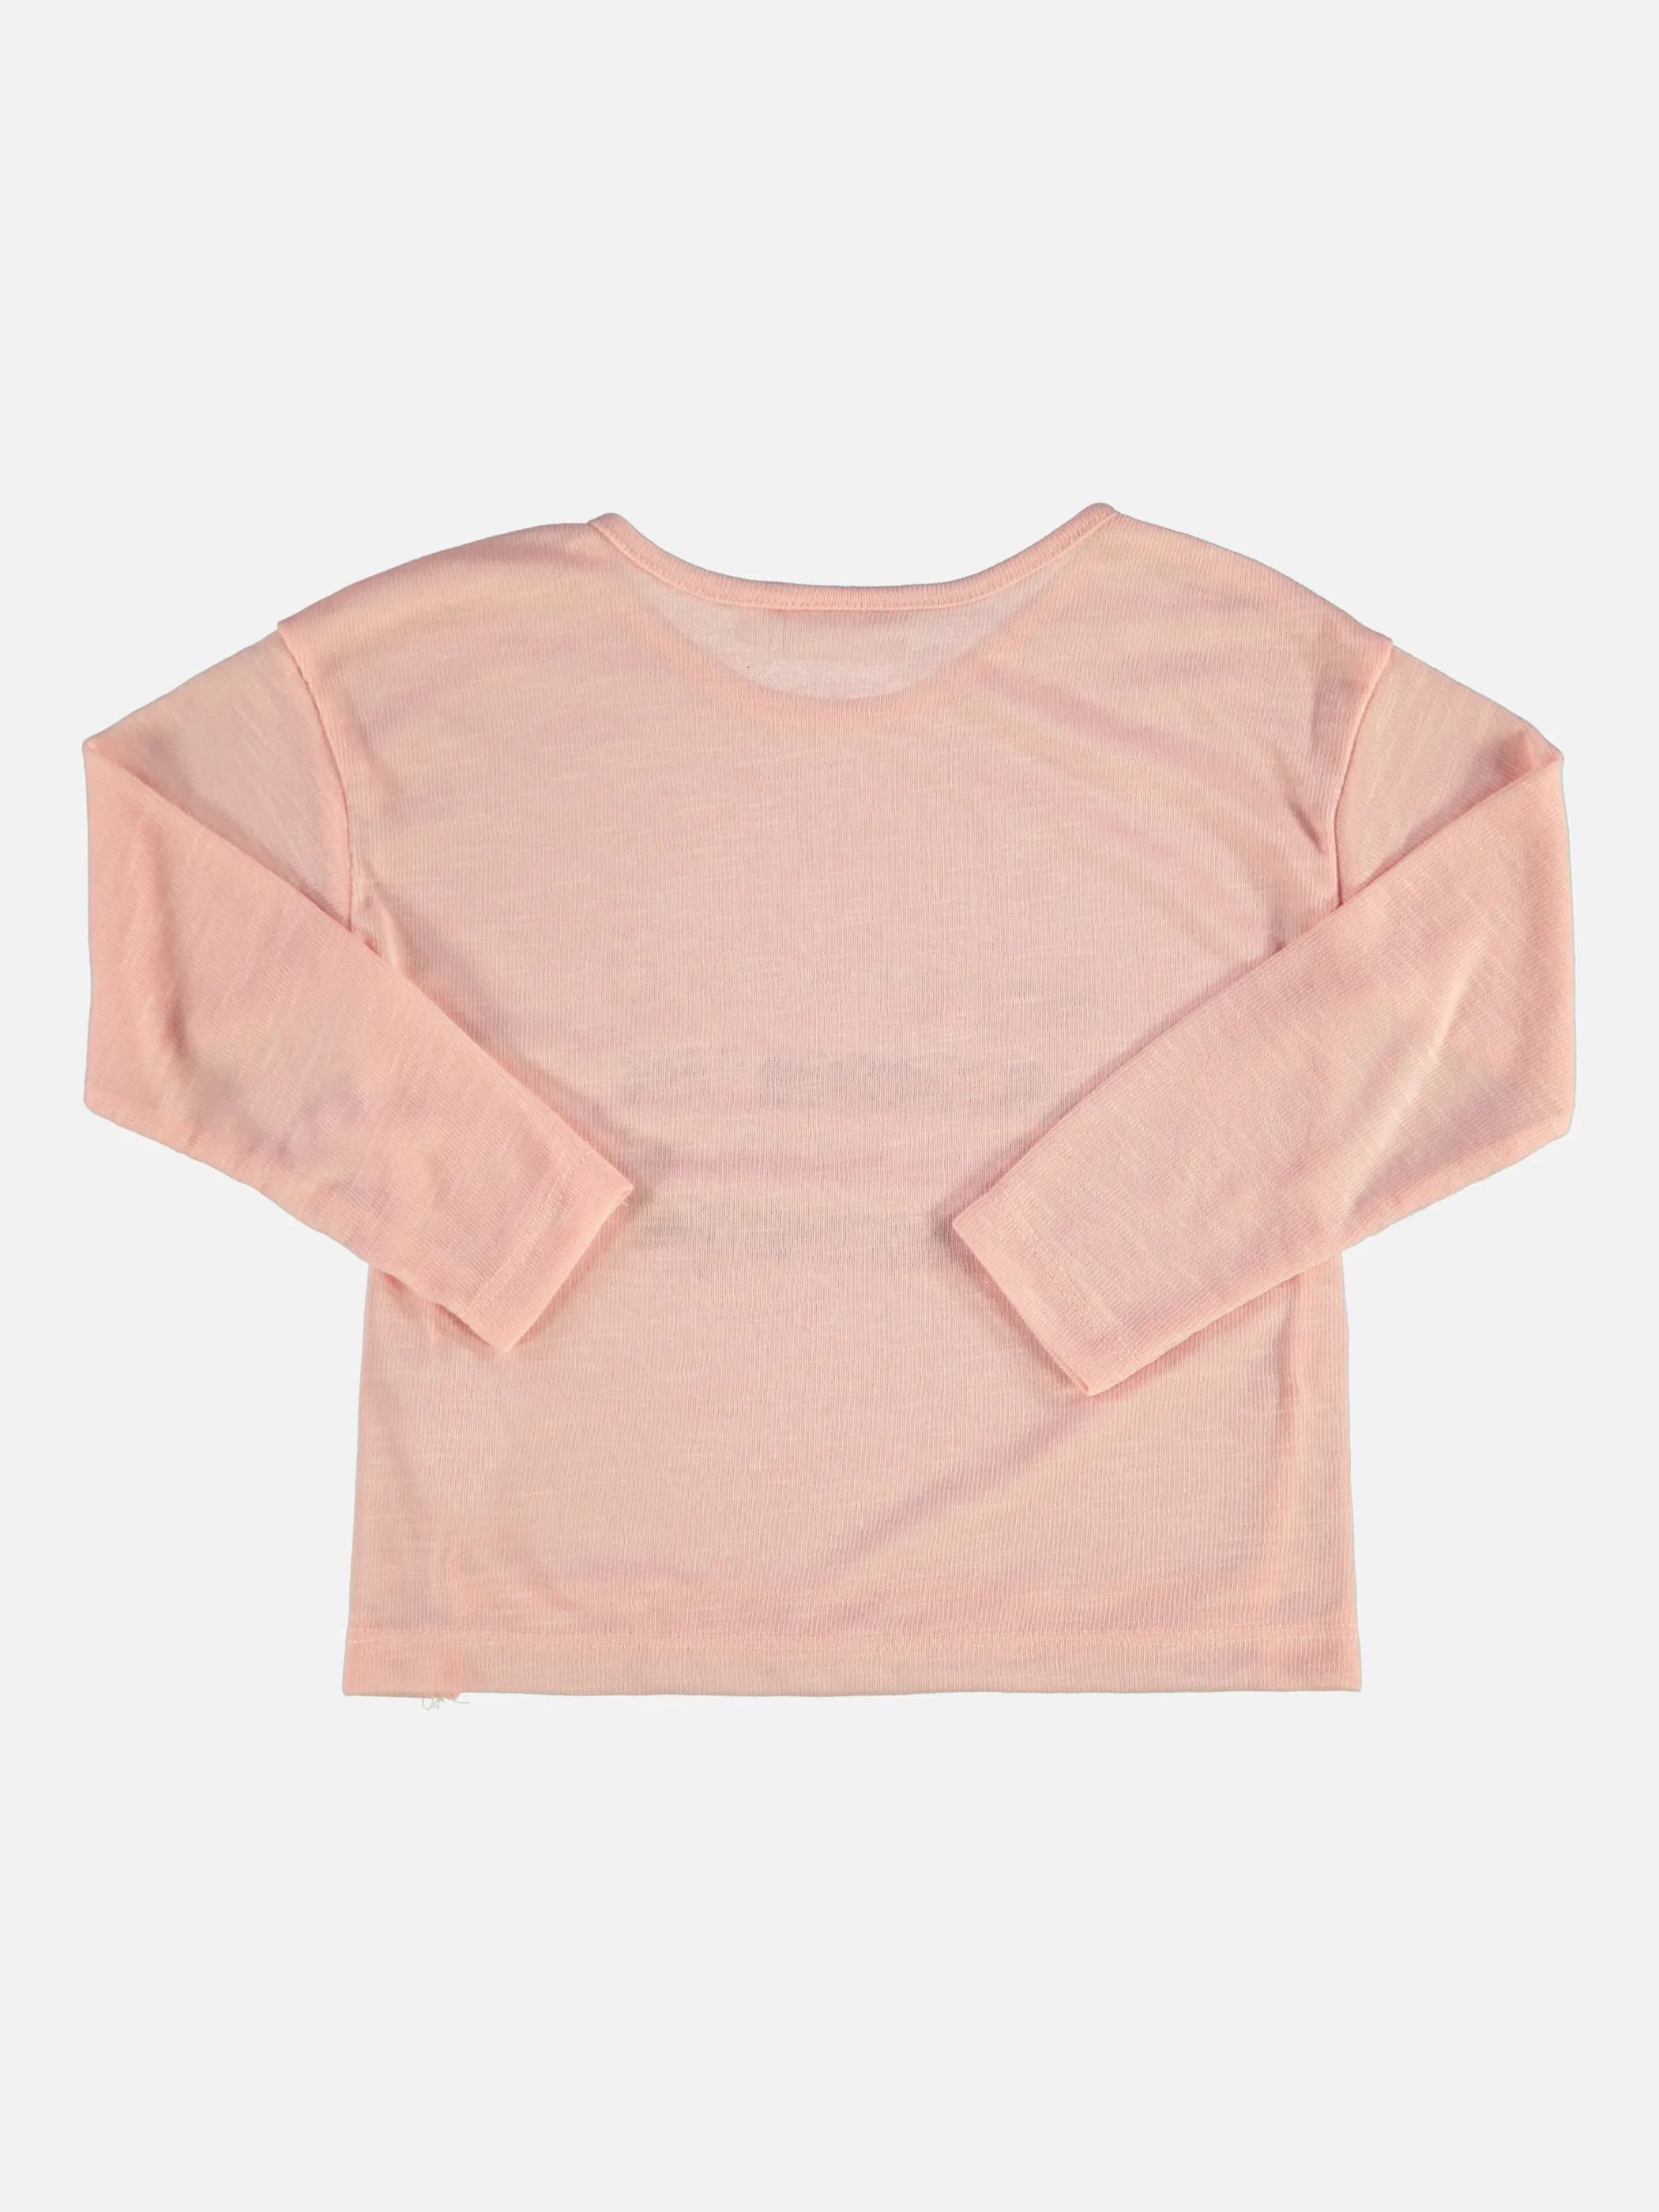 Stop + Go MG Pullover pink mit Wording Pink 846085 PINK 2